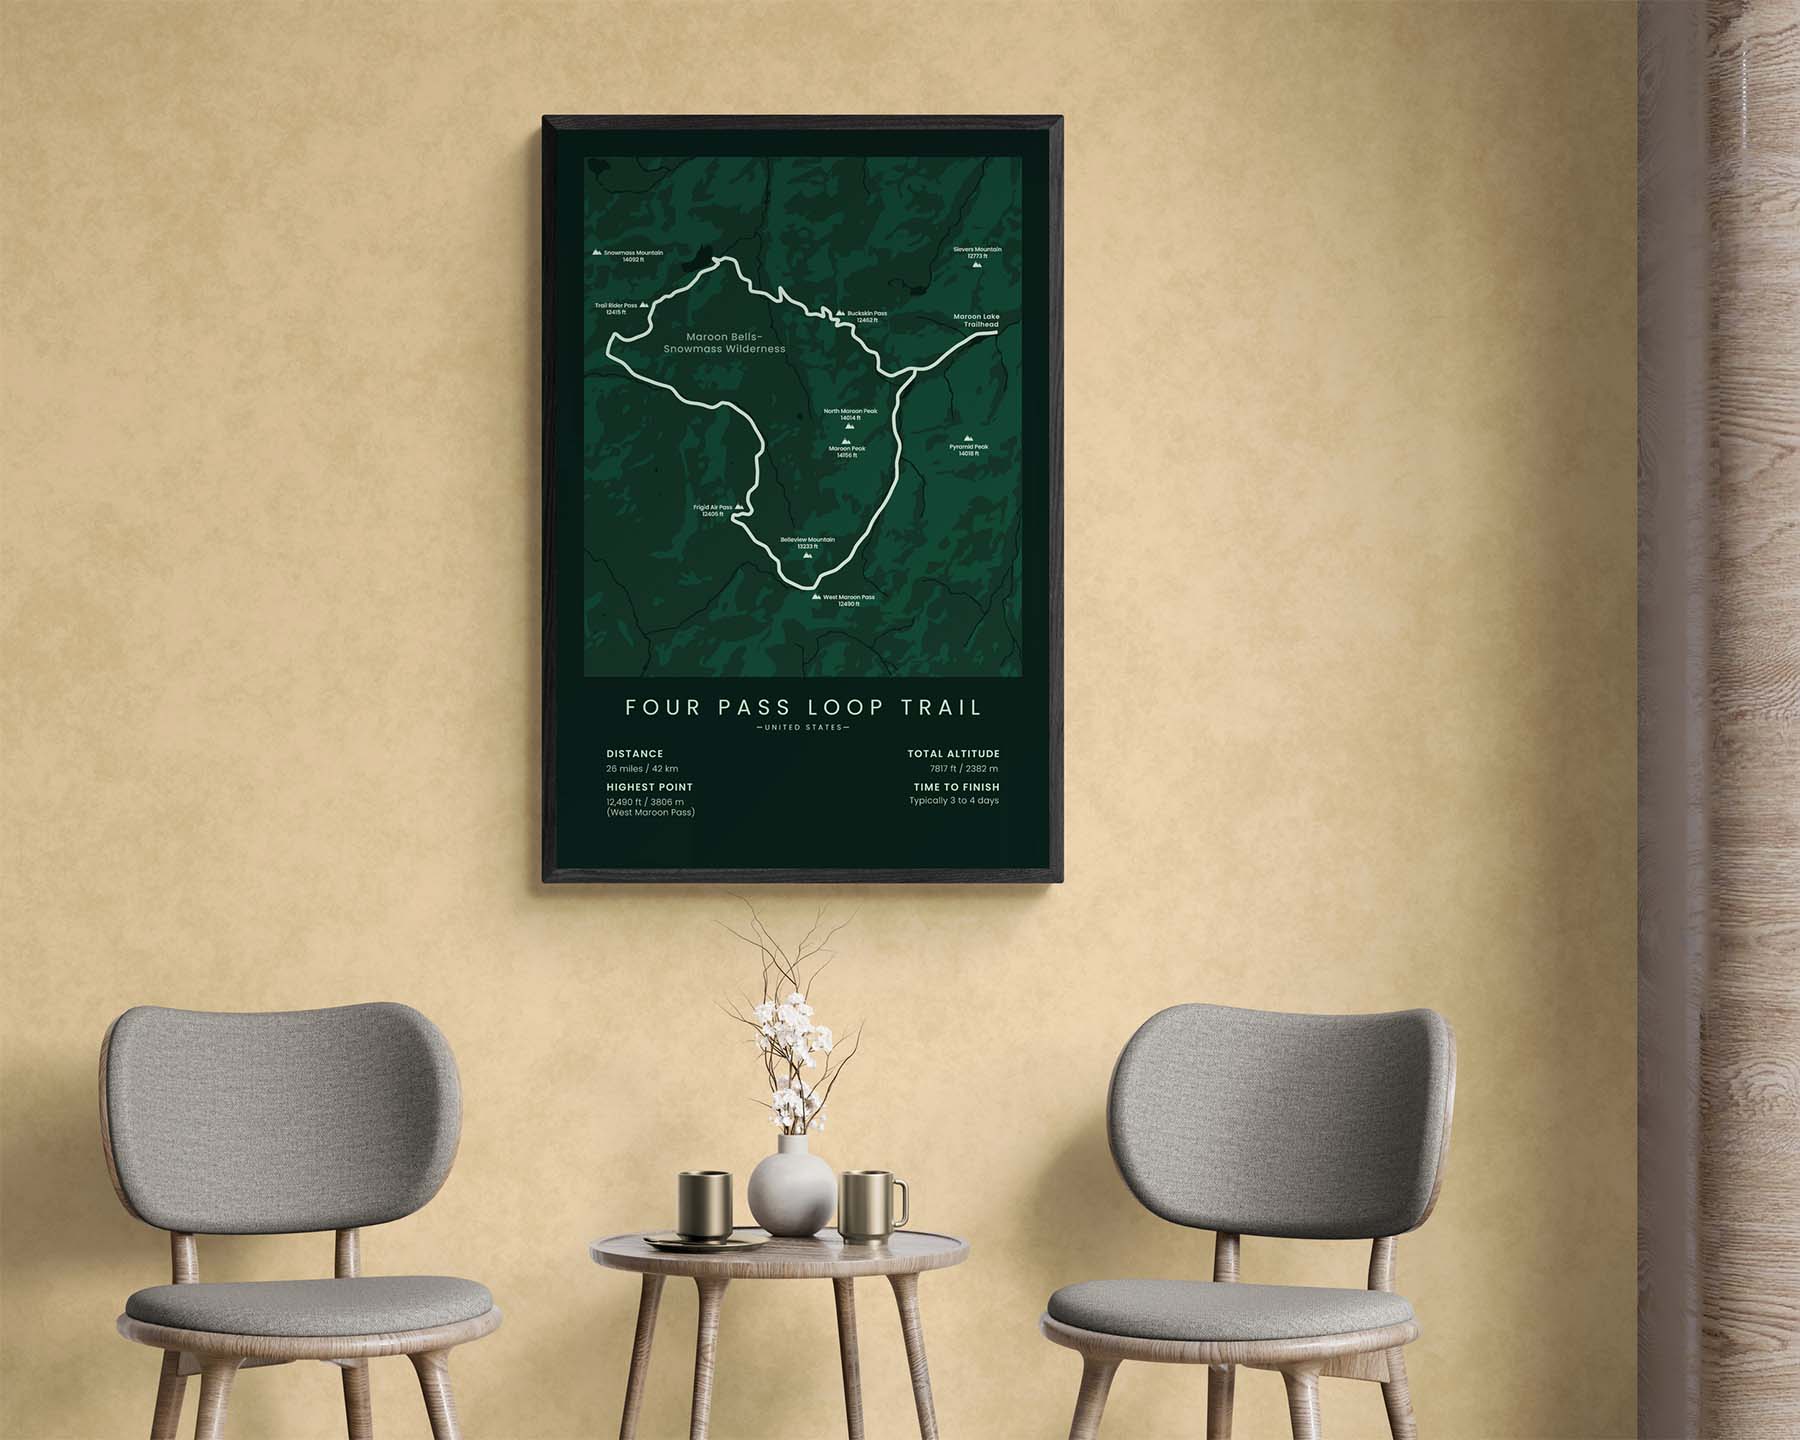 Four Pass Loop (Crater Lake) hike poster in minimal room decor